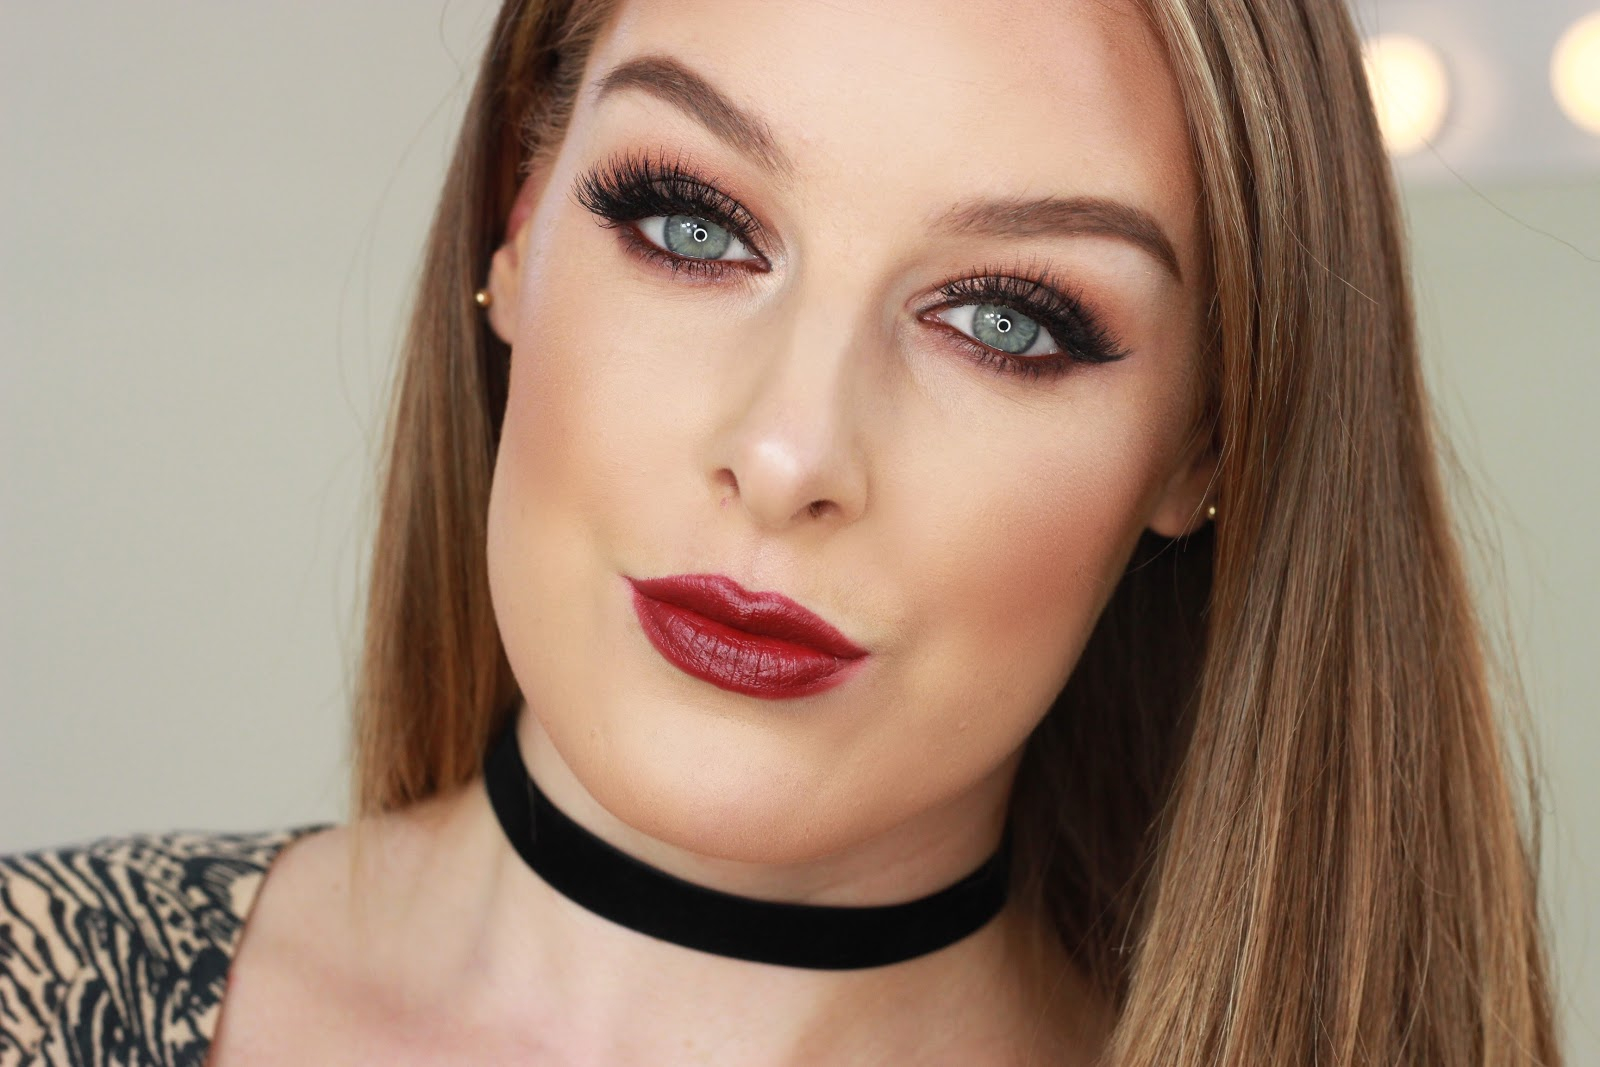 Eye Makeup For Berry Lips Autumnfall Makeup Tutorial Grungy Eyes And Berry Lips Zoe Mountford